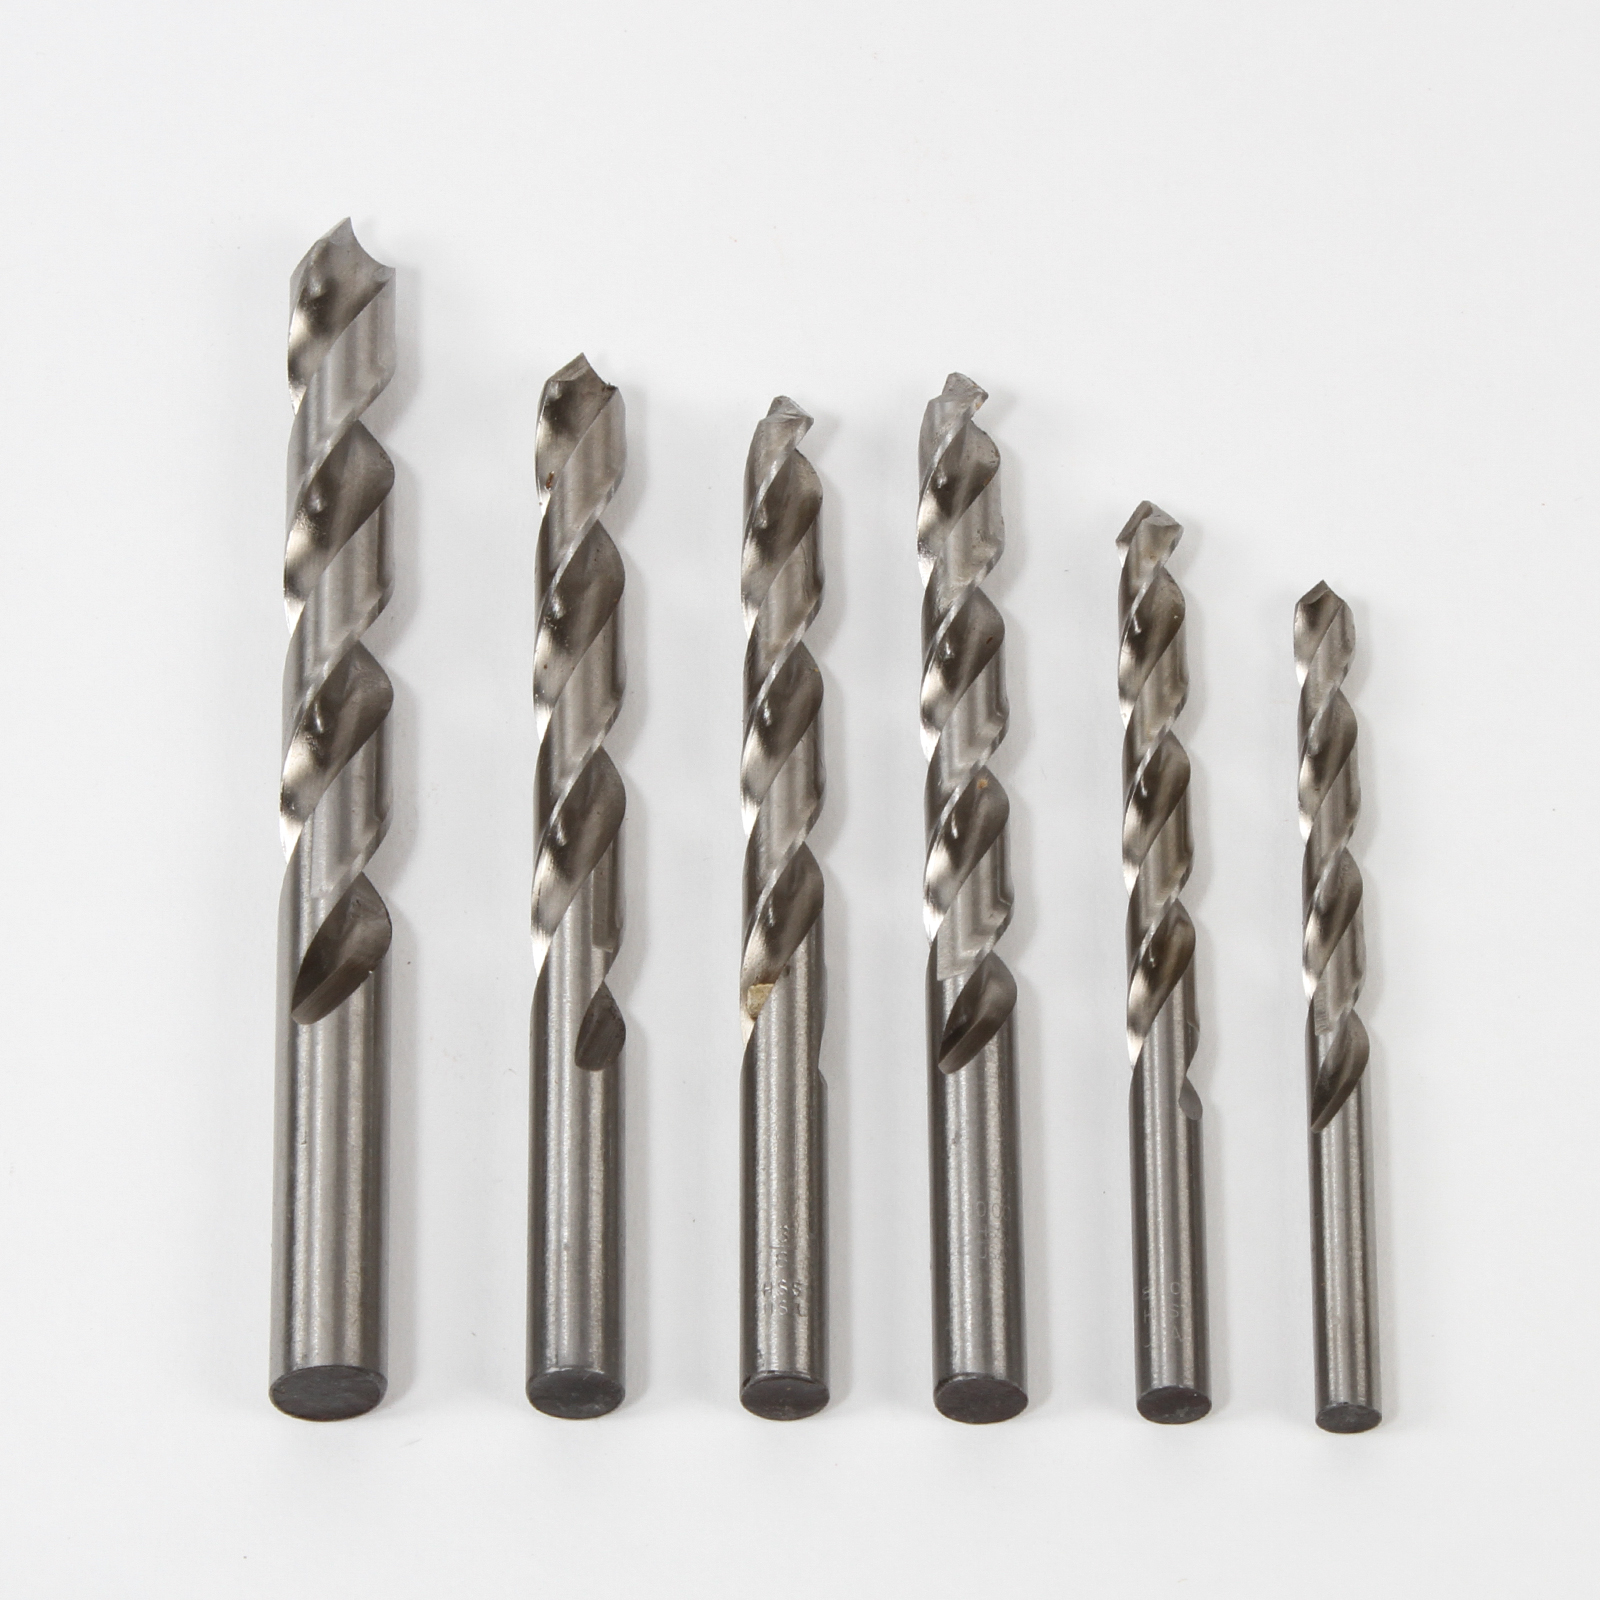 Acrylic Drill Bit Set at Penn State Industries